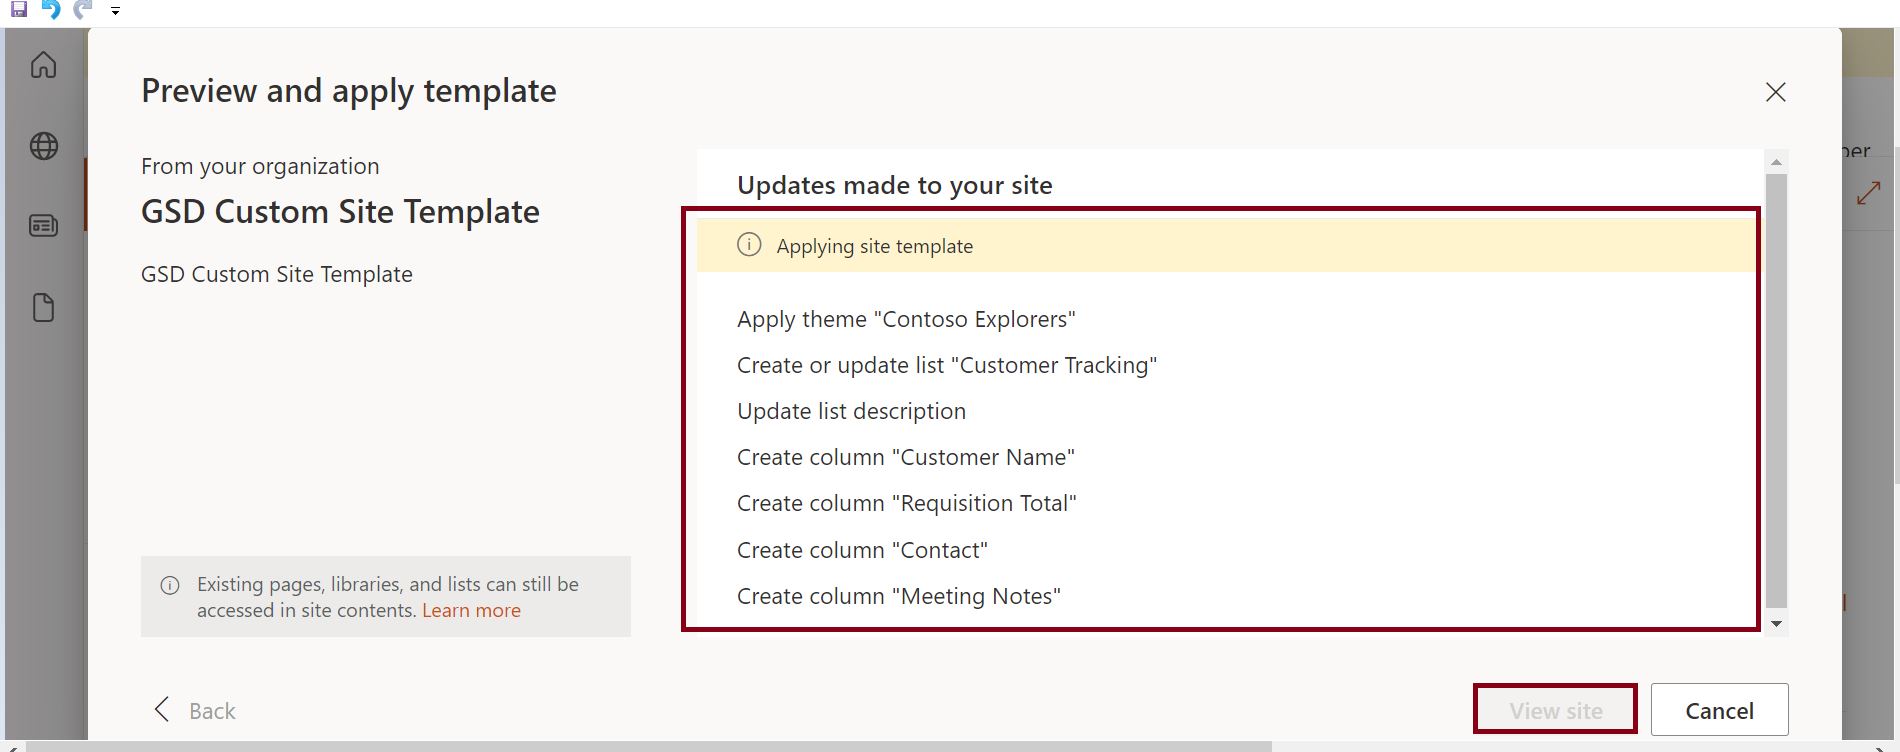 Updates made to your site - Applying site template